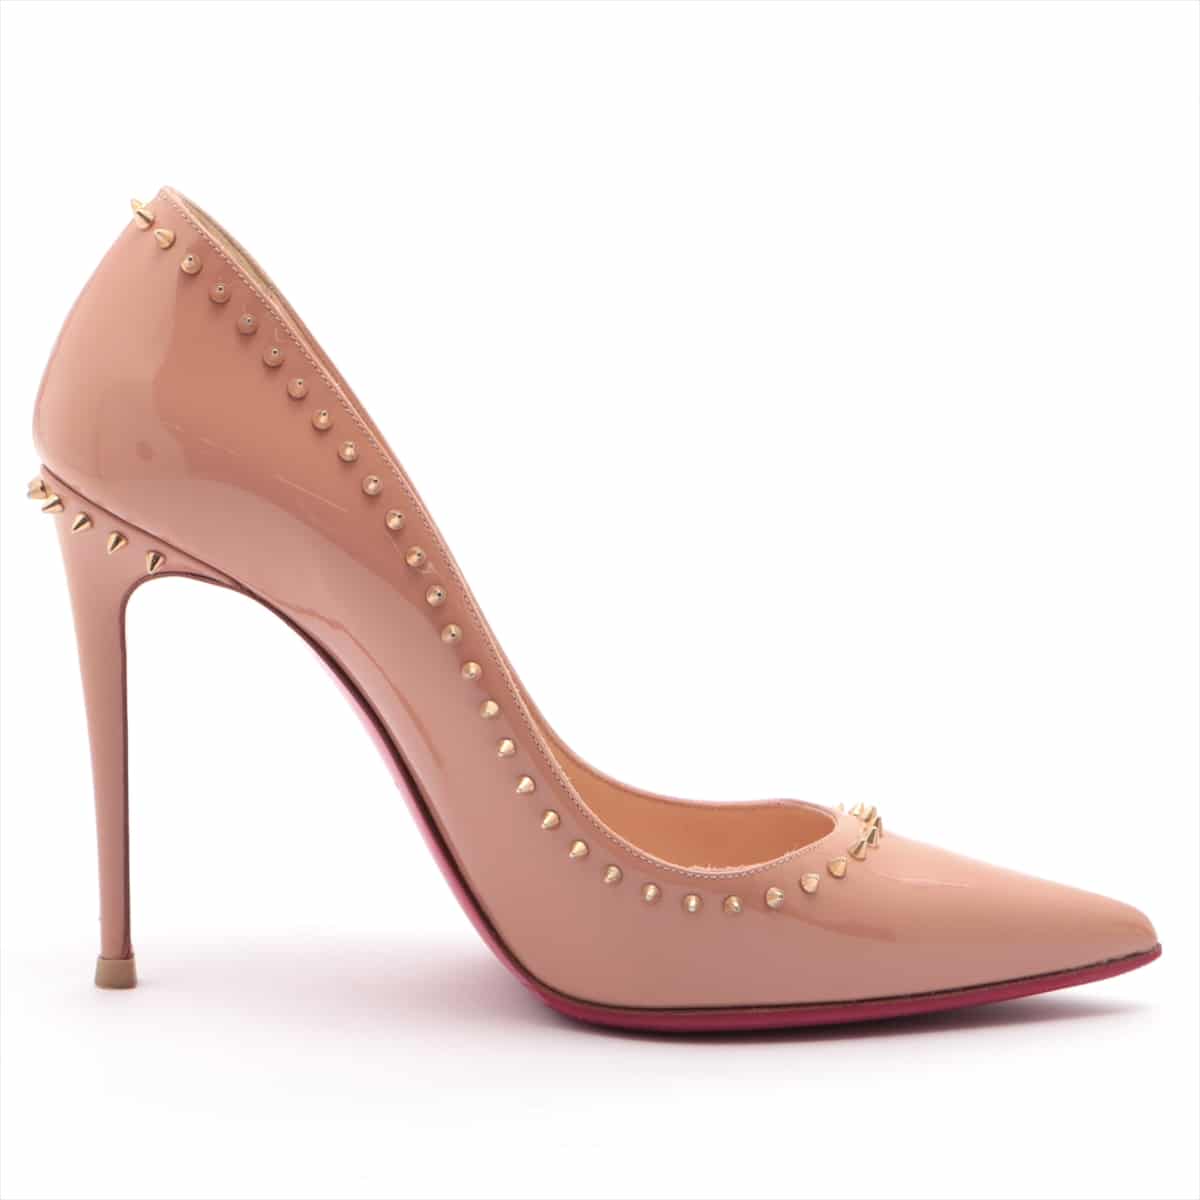 Christian Louboutin Patent leather Pumps 37.5 Ladies' Beige Spike Studs Has half rubber